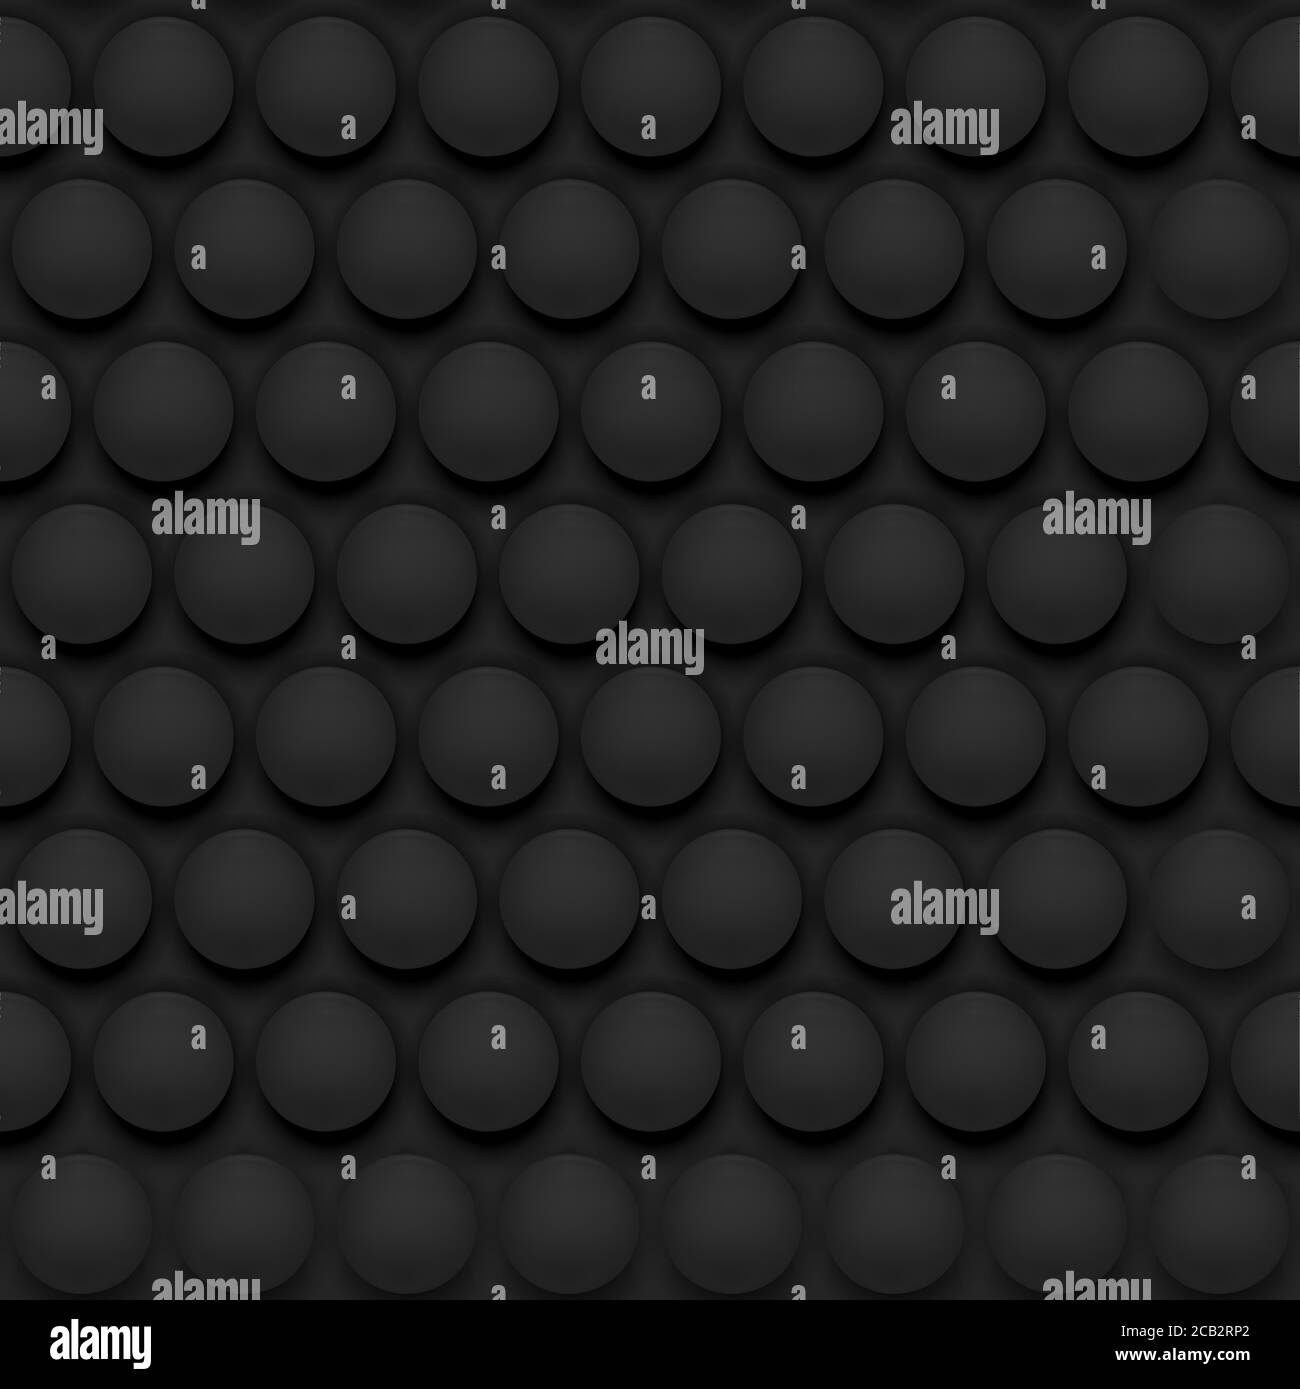 black 3d background with spheres. Seamless geometric pattern Stock Vector